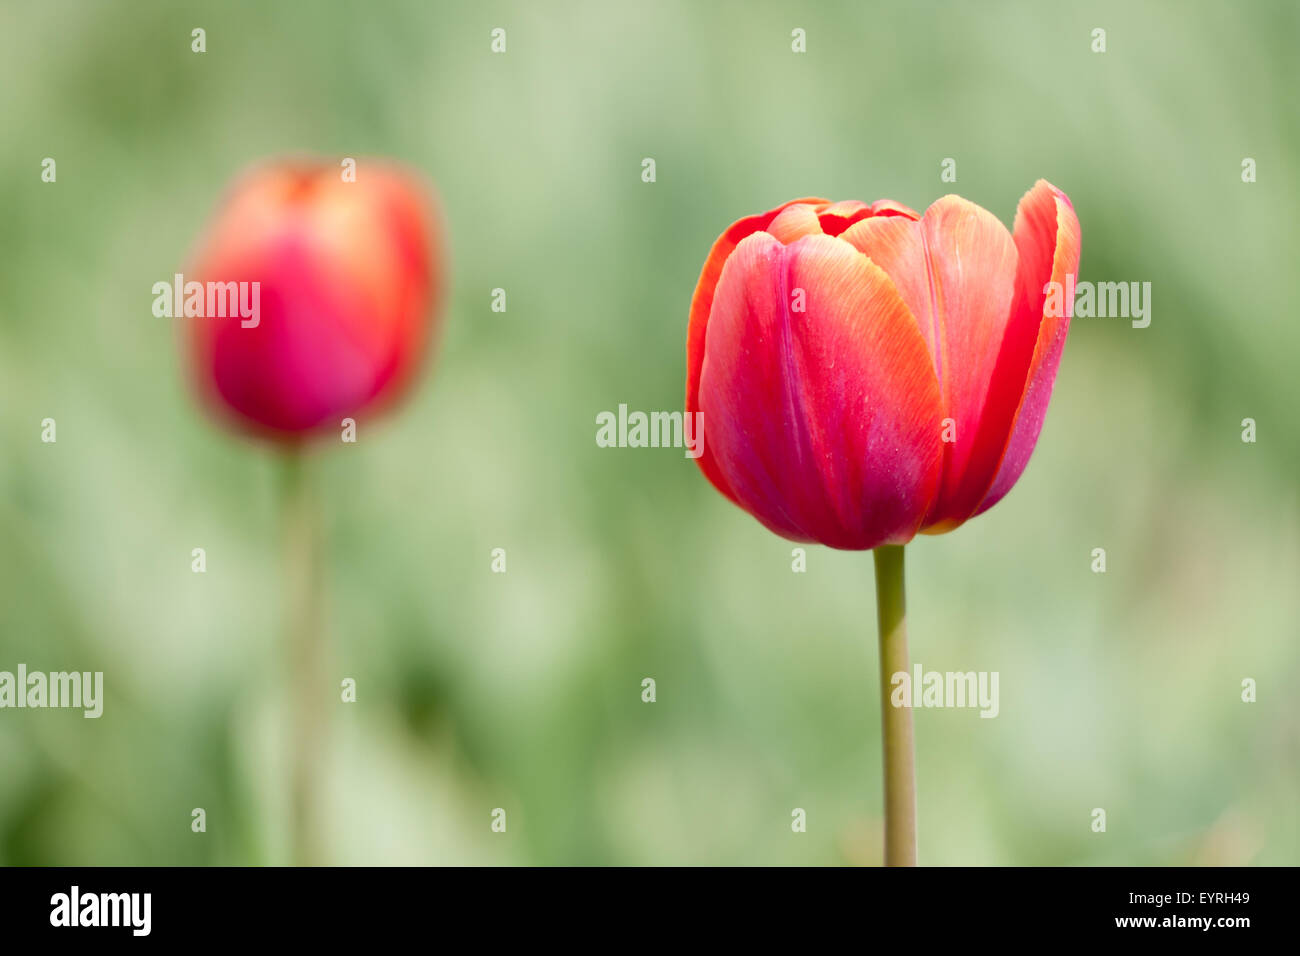 Red tulip shot with a selective focus and a shallow depth of field Stock Photo